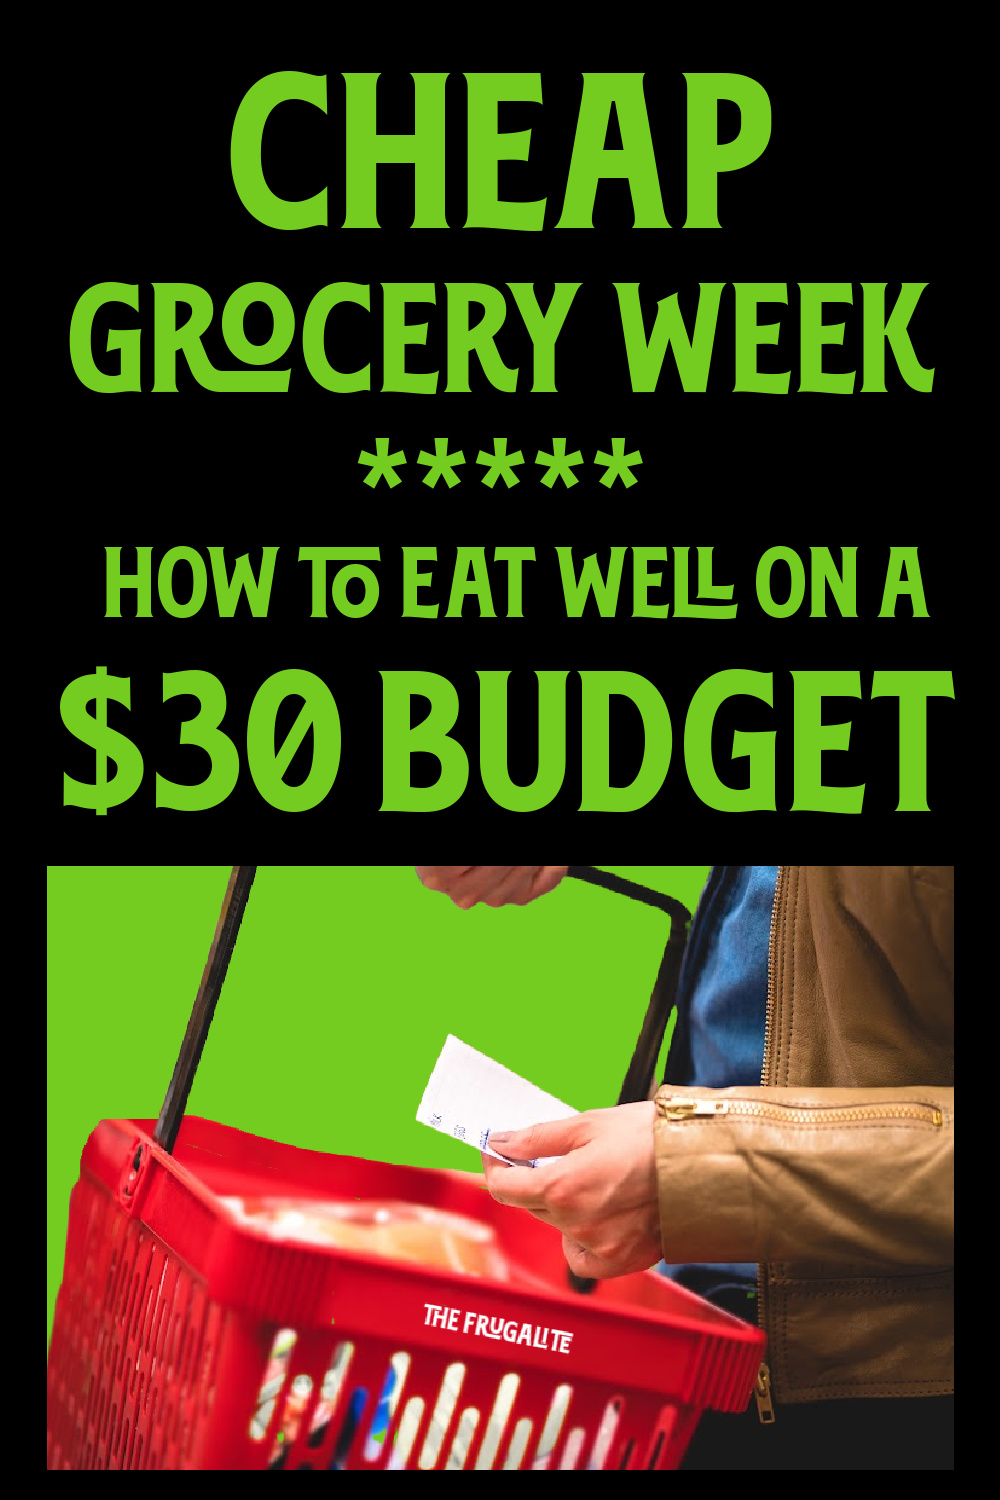 Cheap Grocery Week: How to Eat Well on a $30 Budget